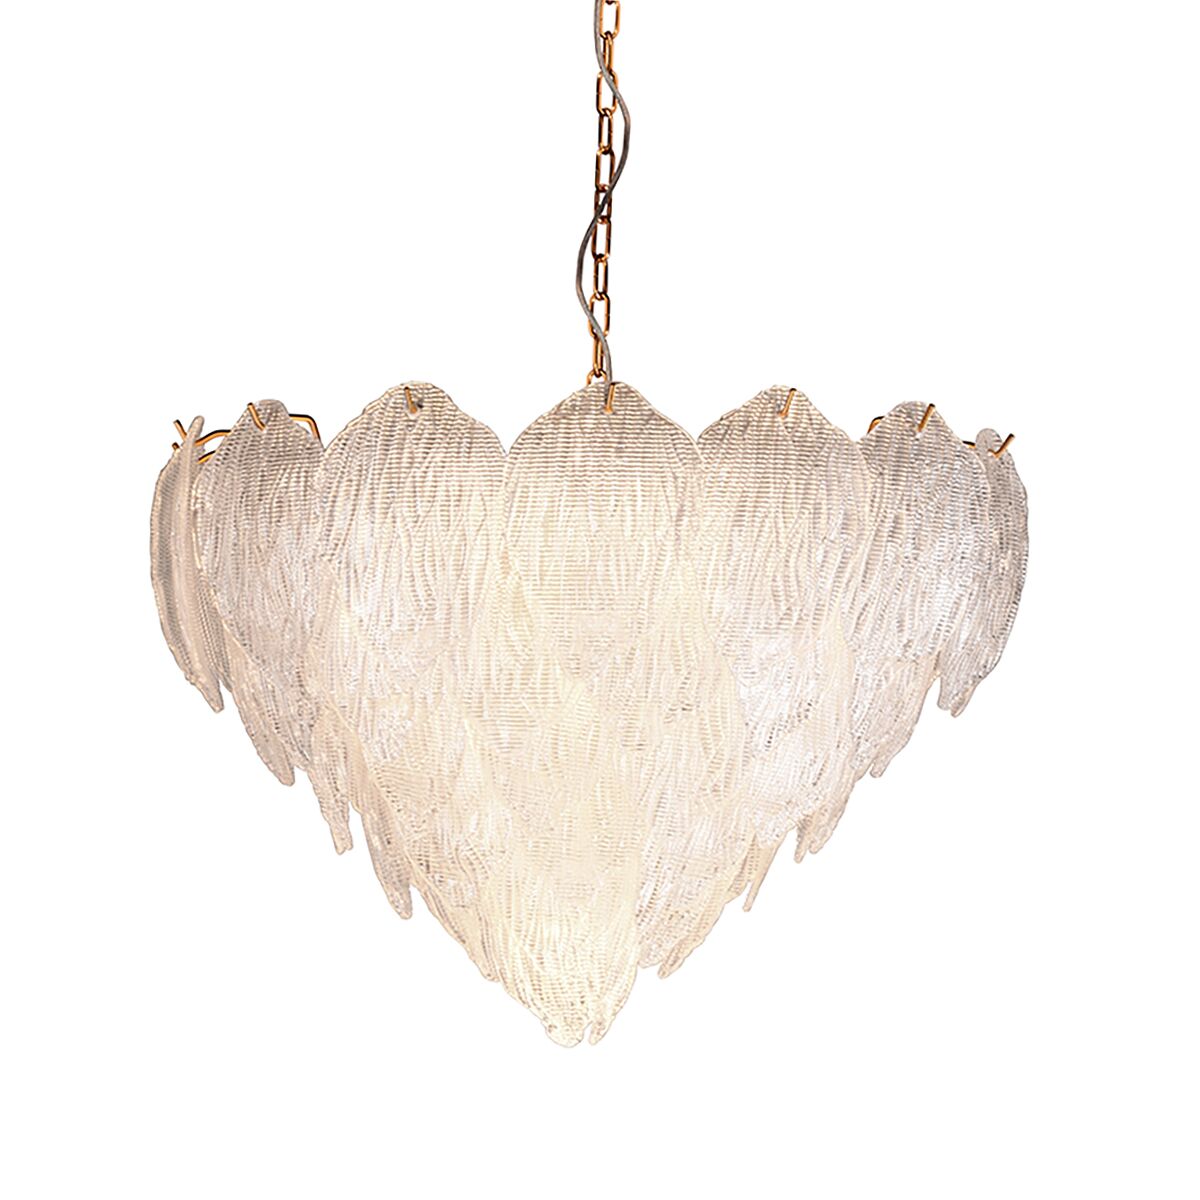 Ch9081-65 Acanthus Textured Glass Updated Modern Glam Large Chandelier